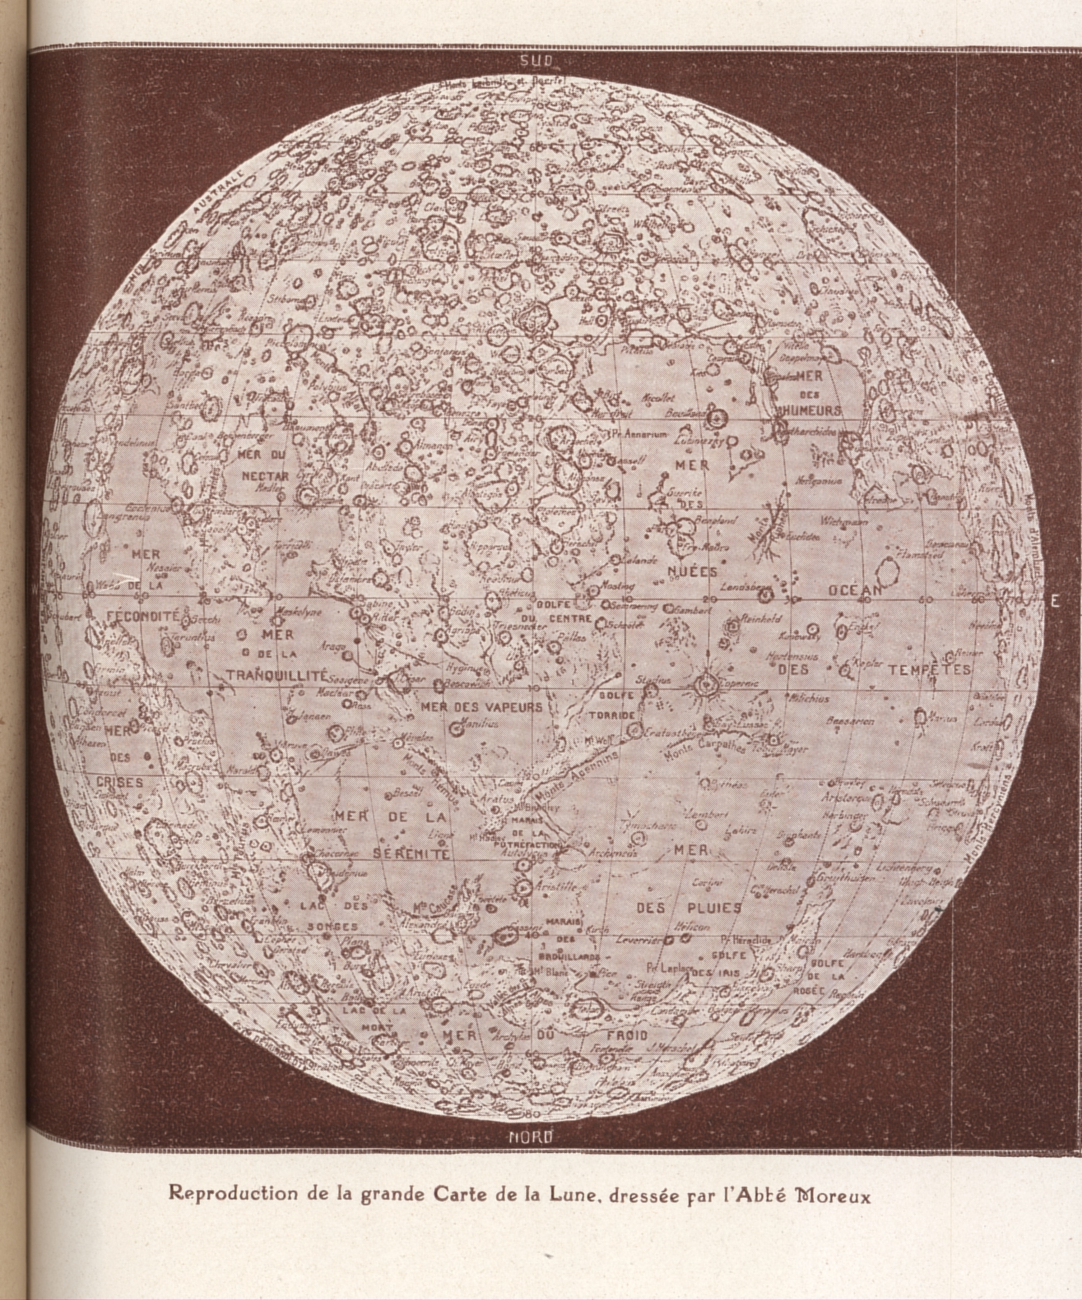 Reproduction of the large map of the moon by the Abbe Moreux